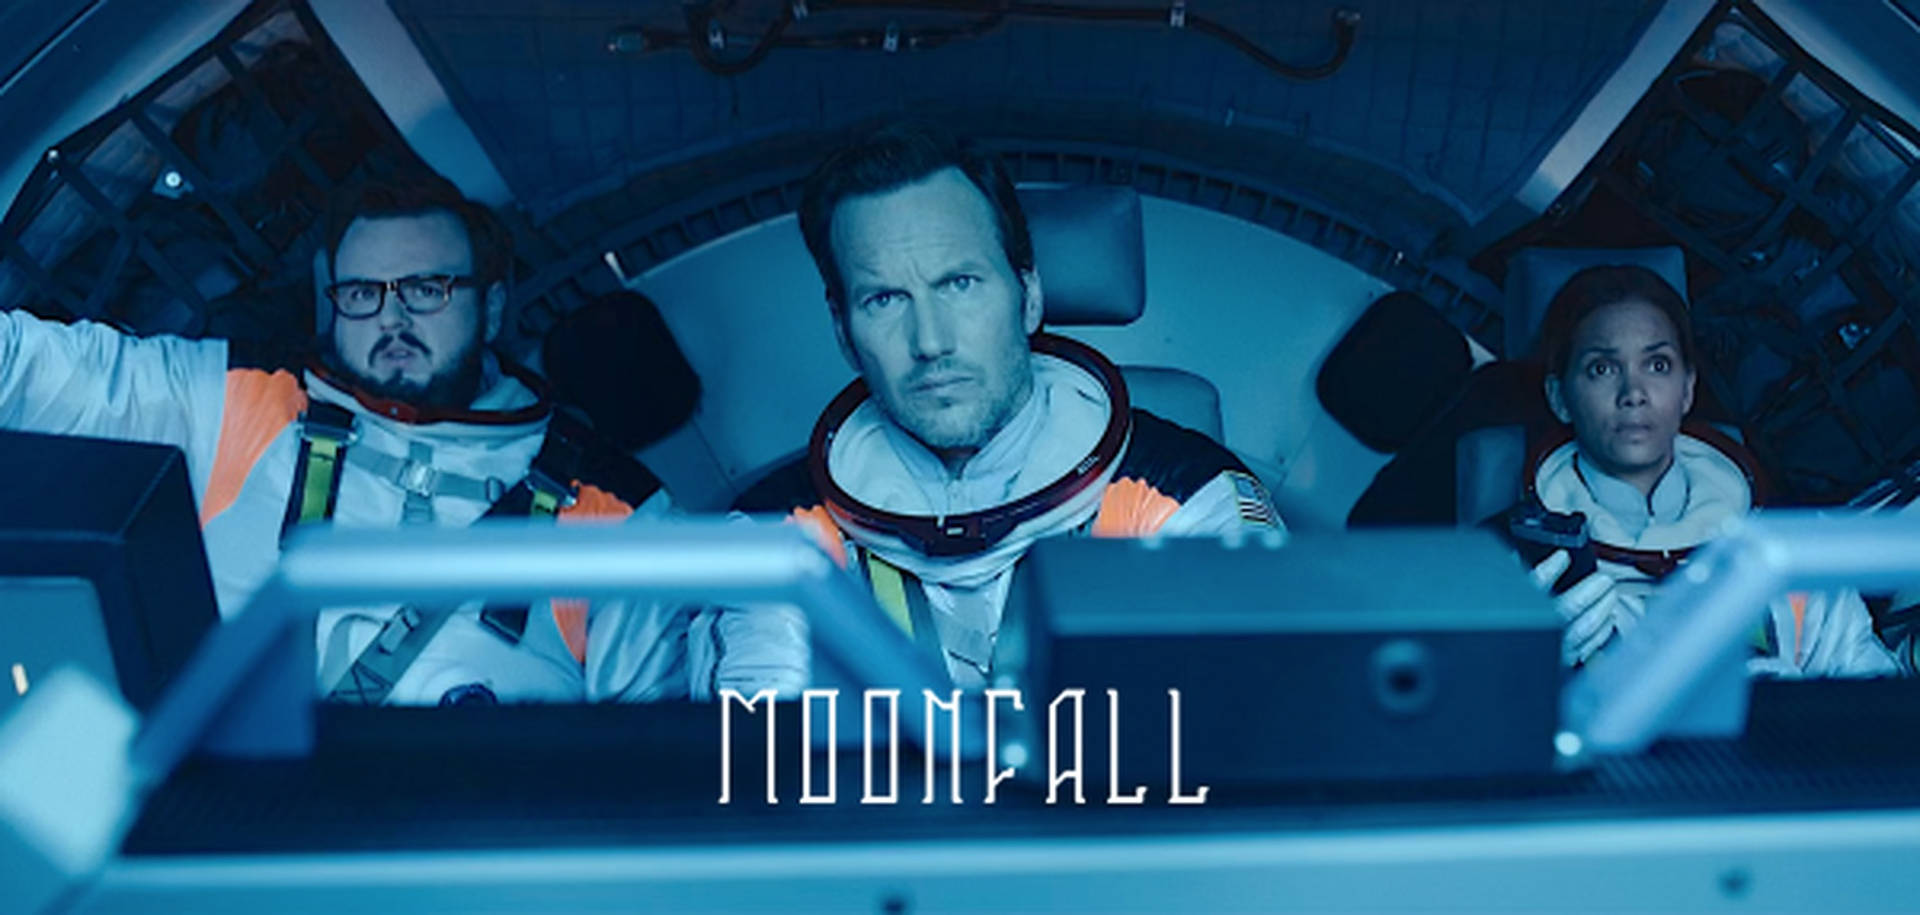 Moonfall Movie - Blue Lit Poster Background